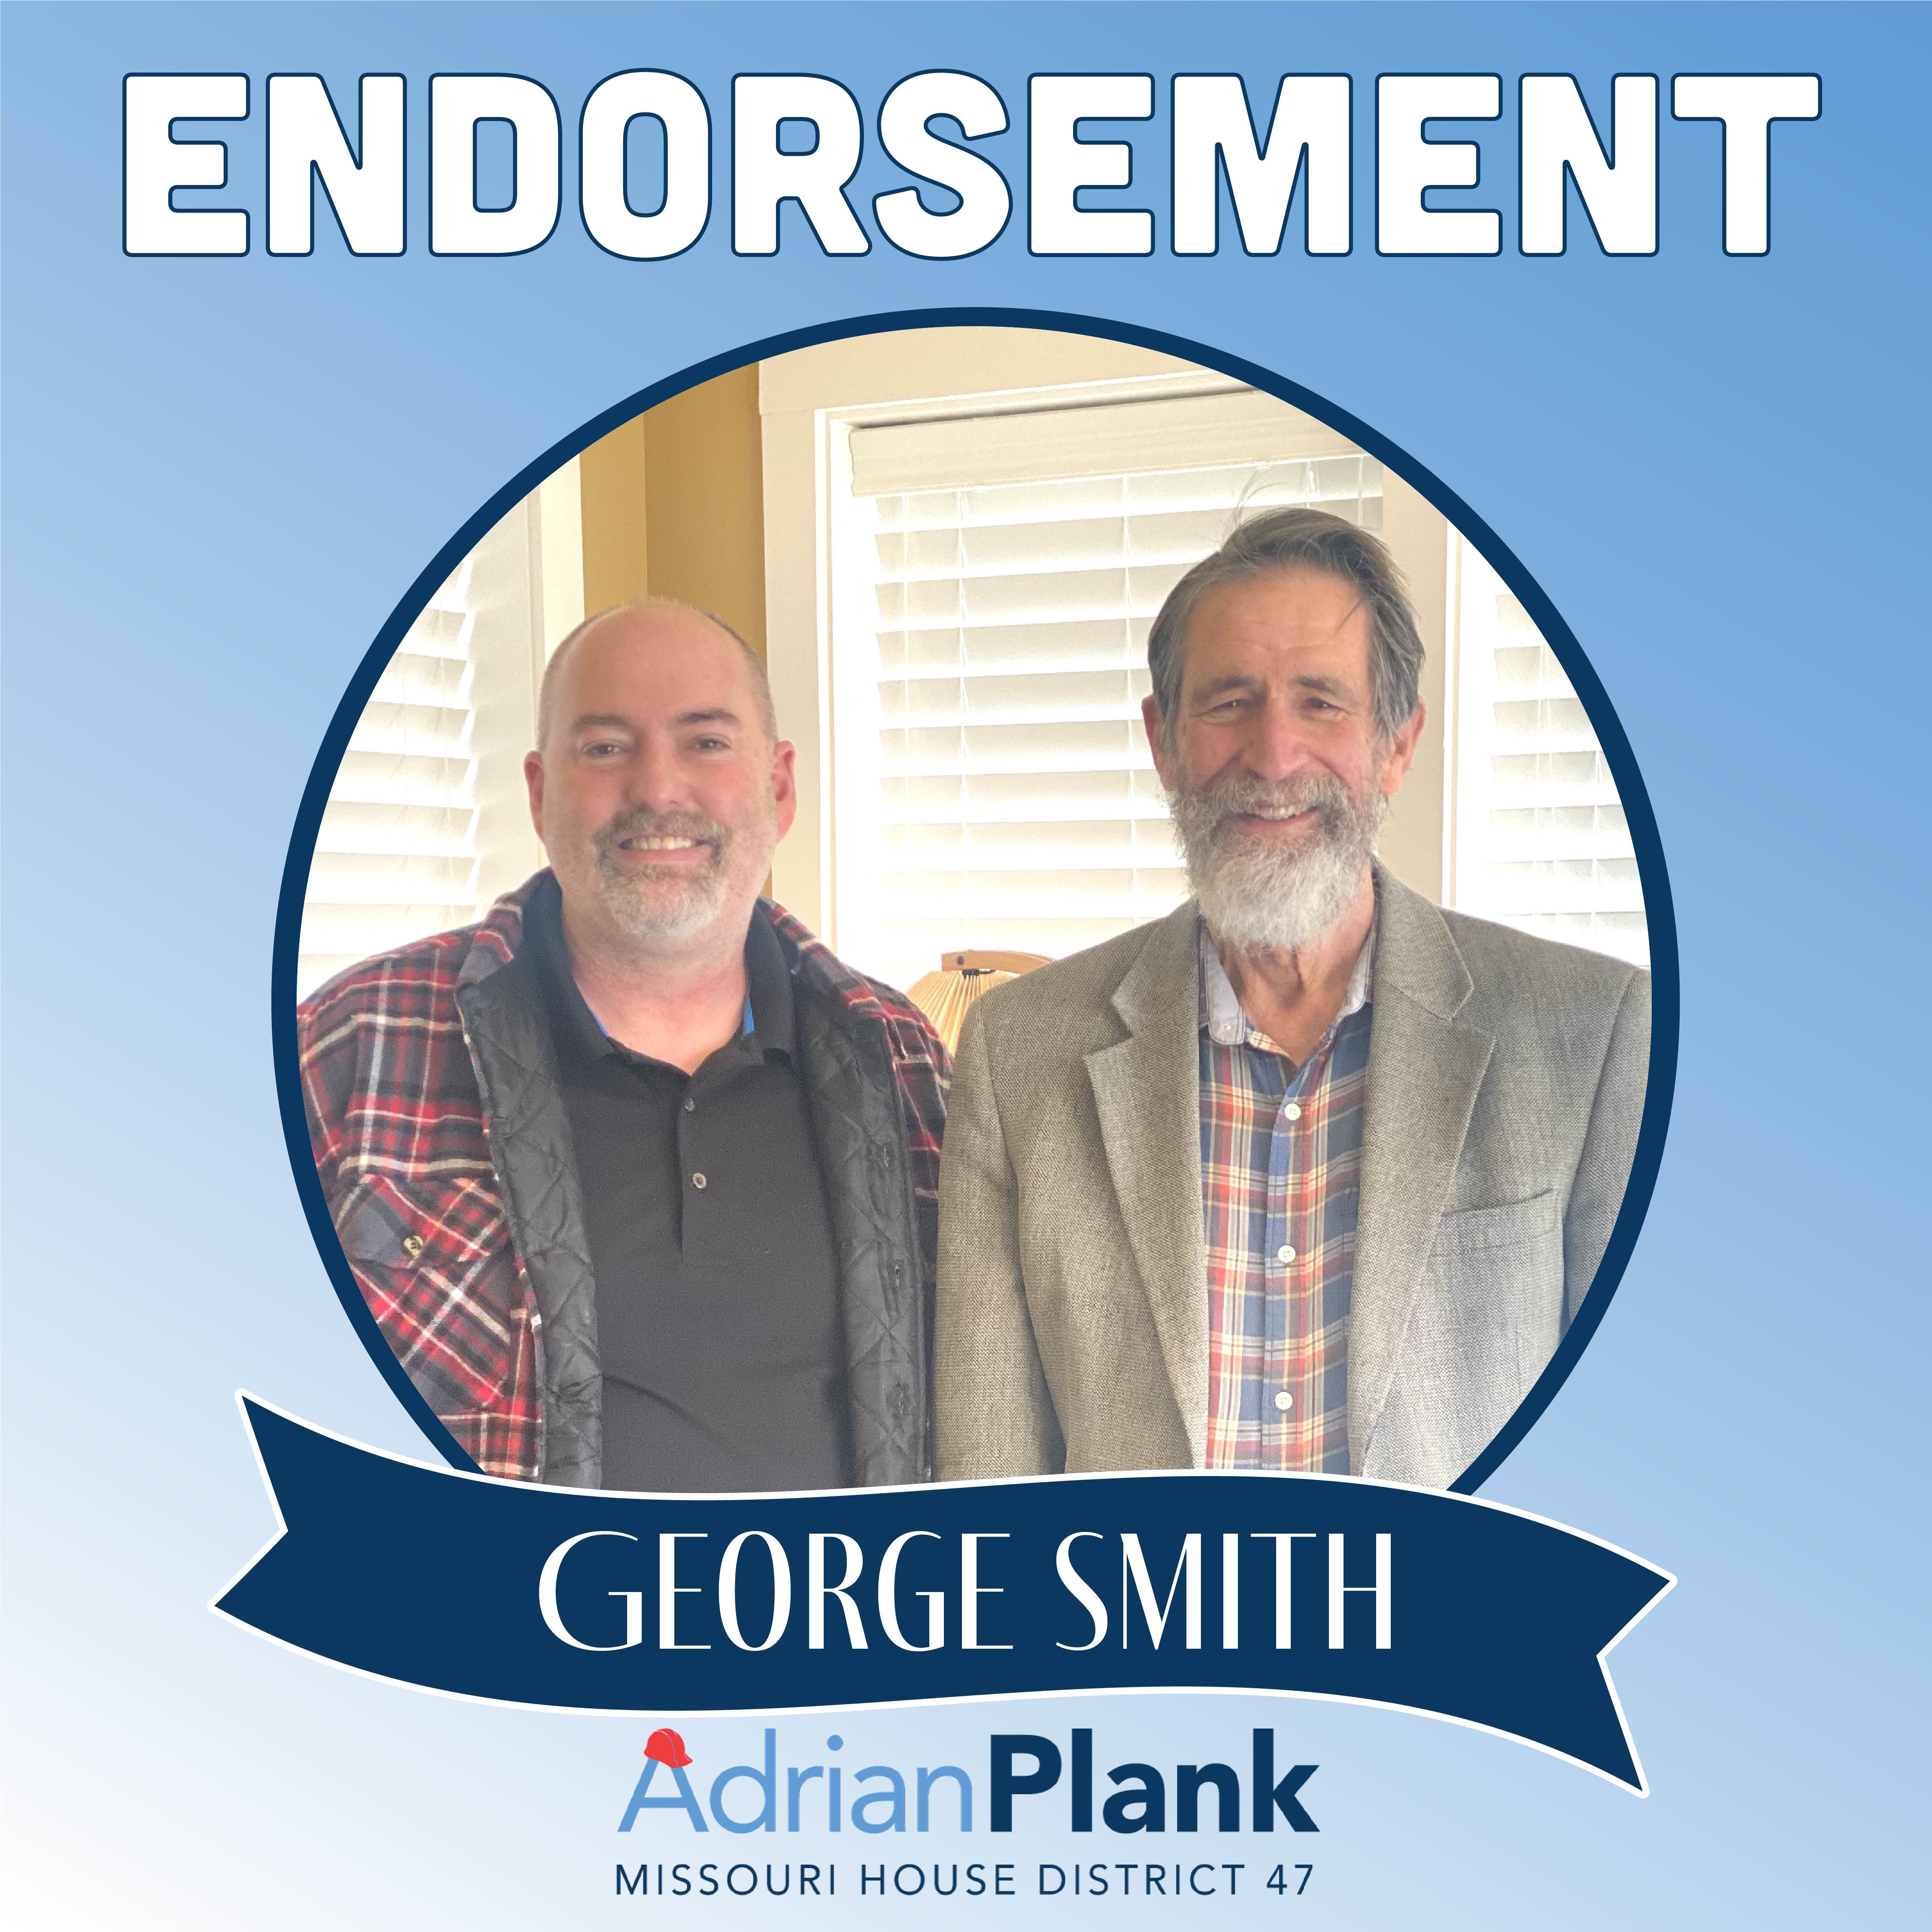 Adrian Plank Endorsement from George Smith